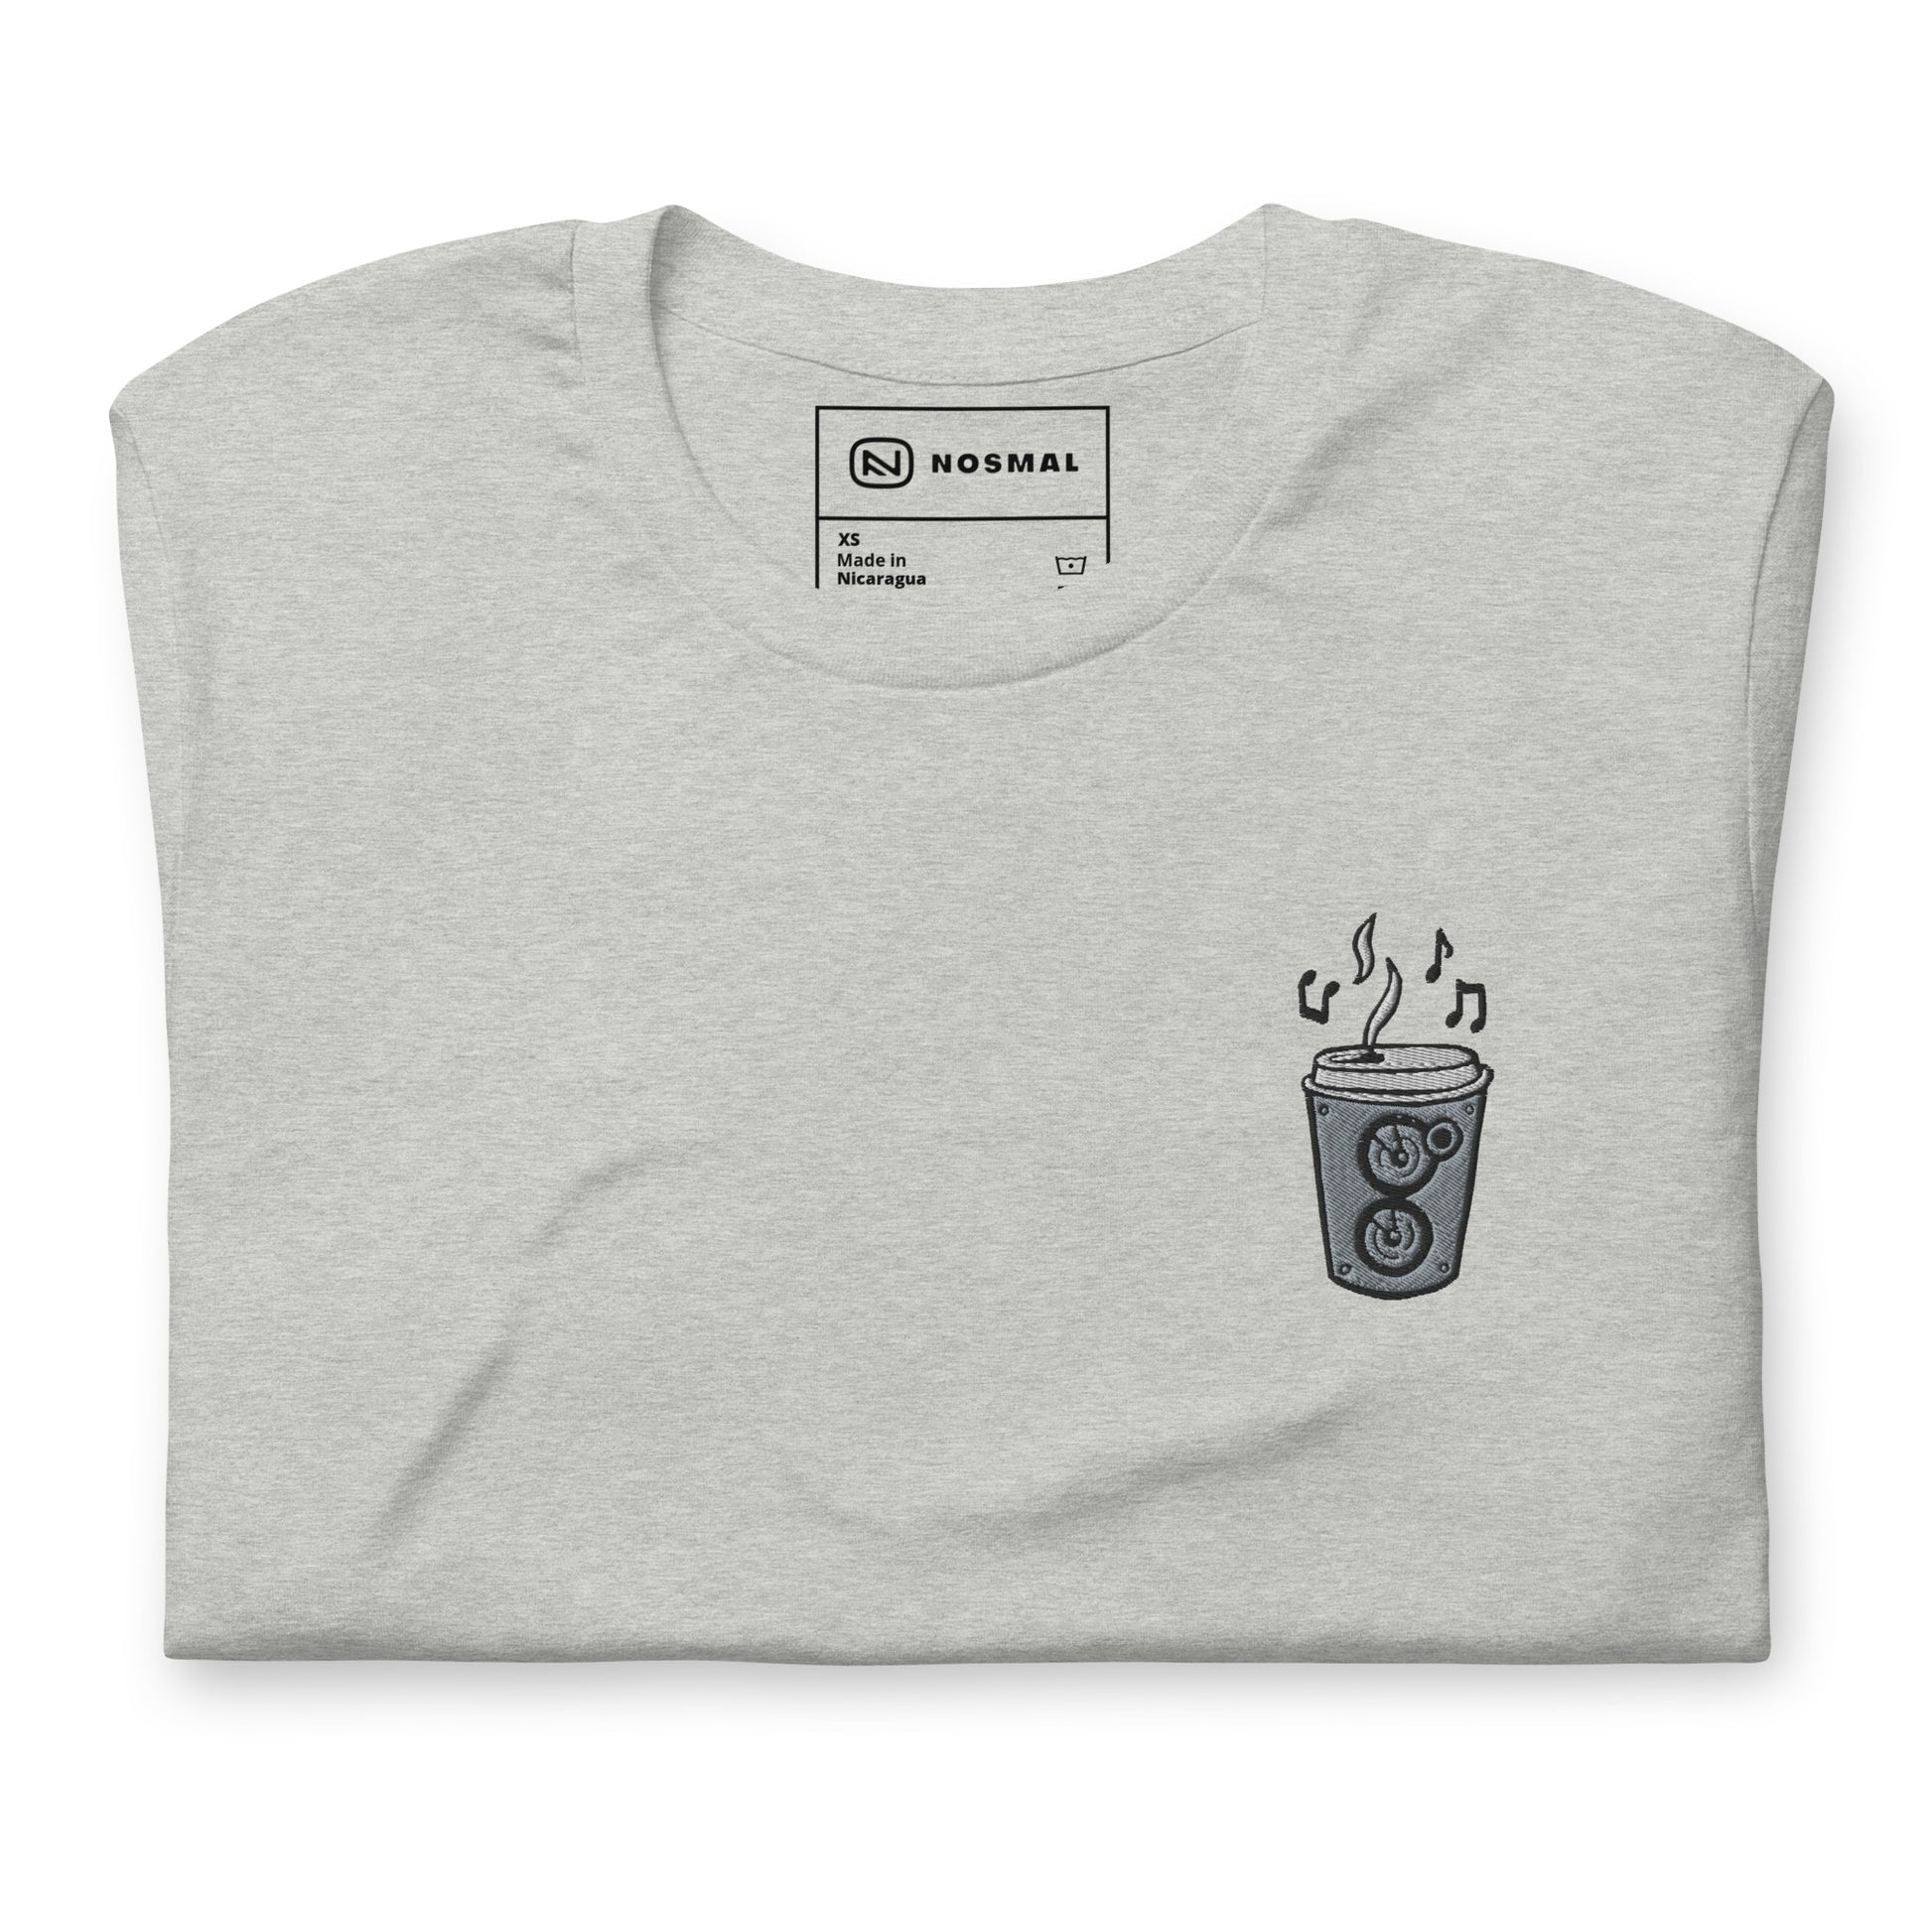 Top down view of the coffee is my jam embroidered design on heather athletic grey unisex t-shirt.